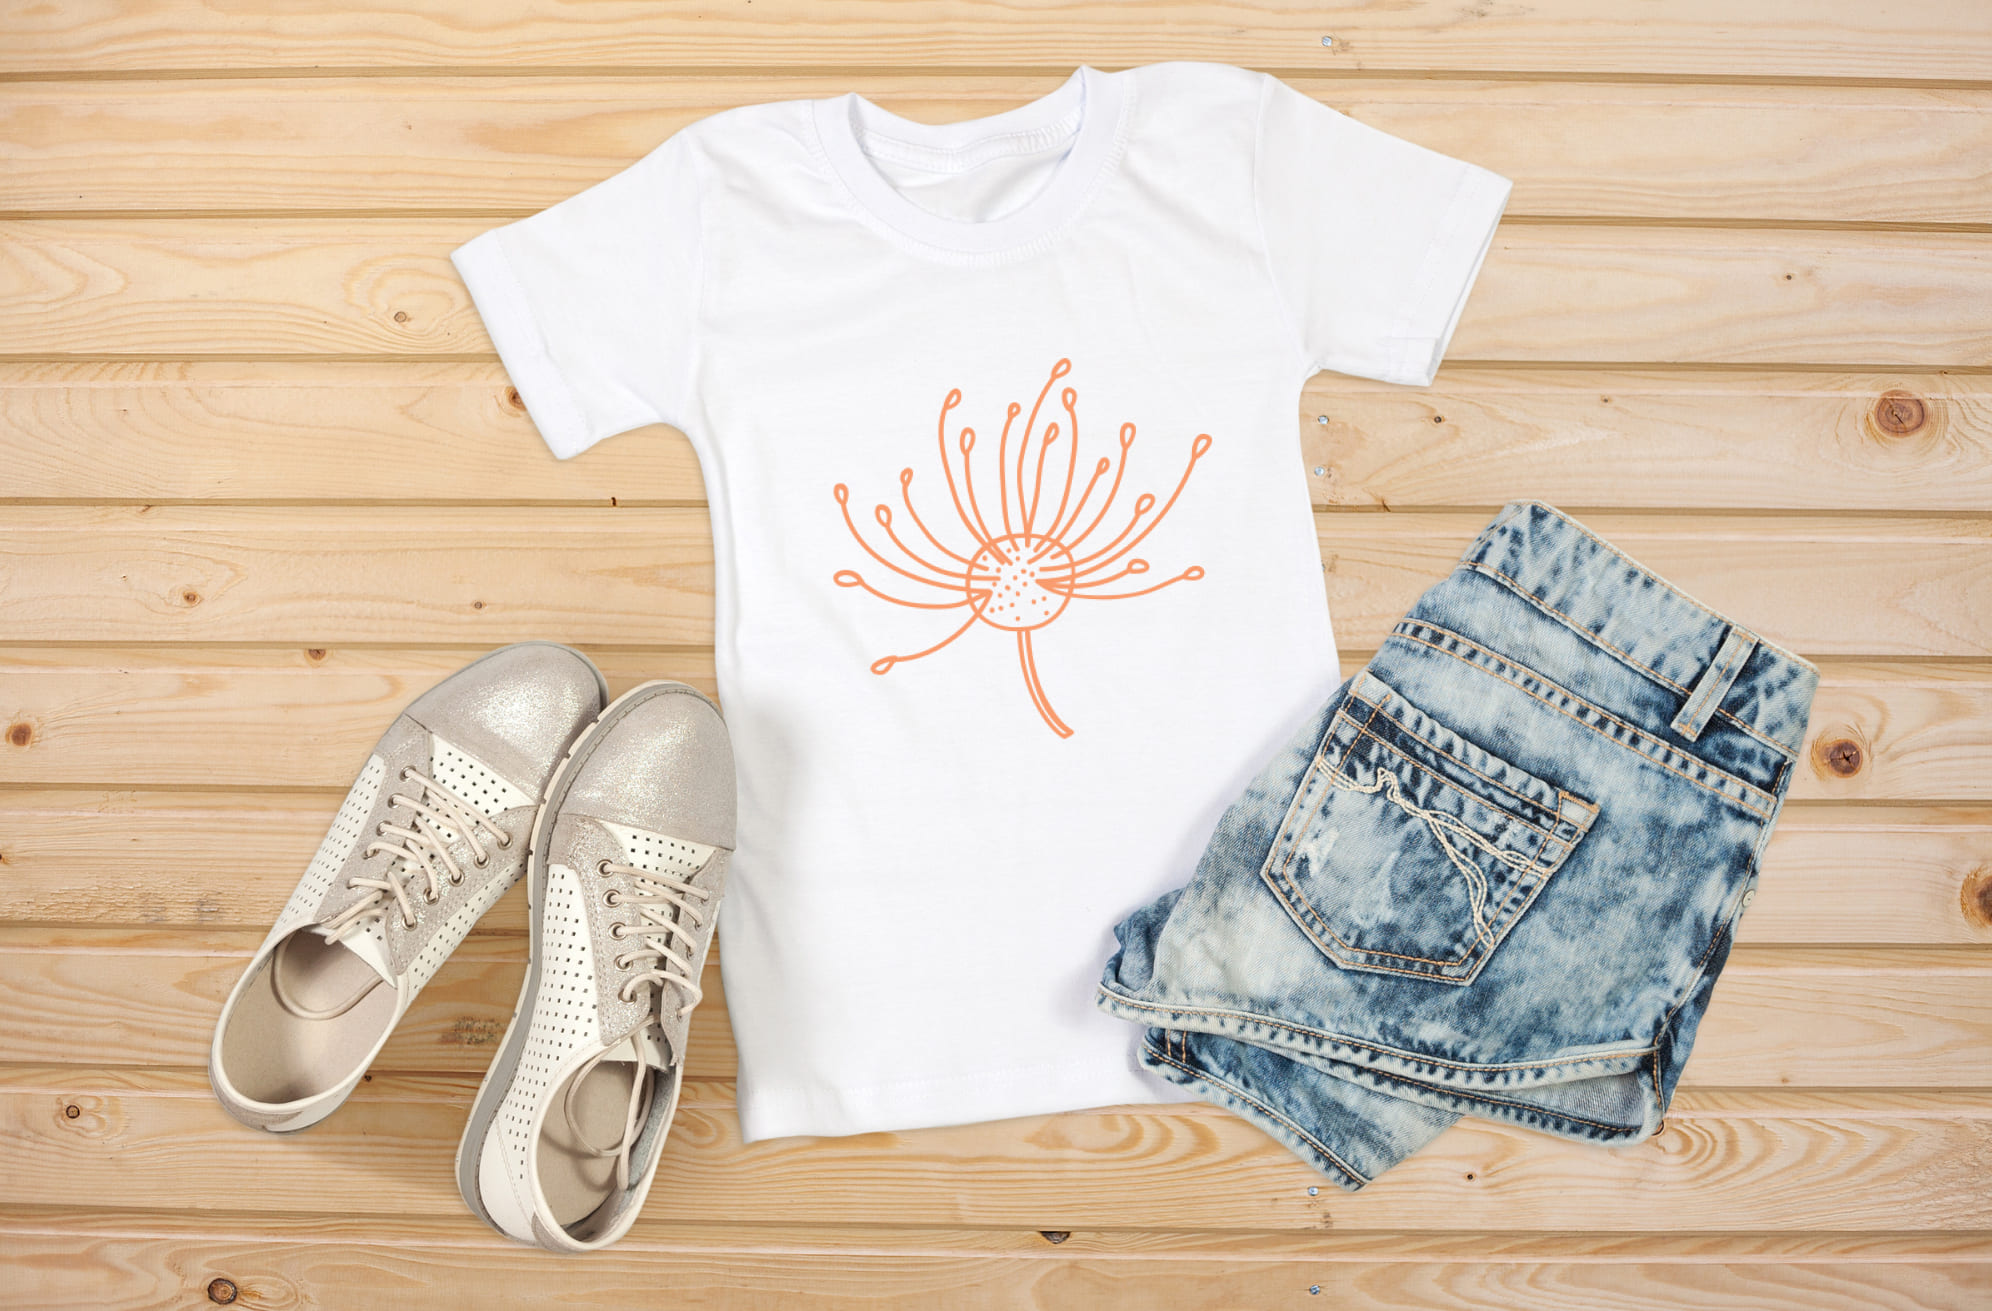 T-shirt picture with amazing dandelion print in orange color.